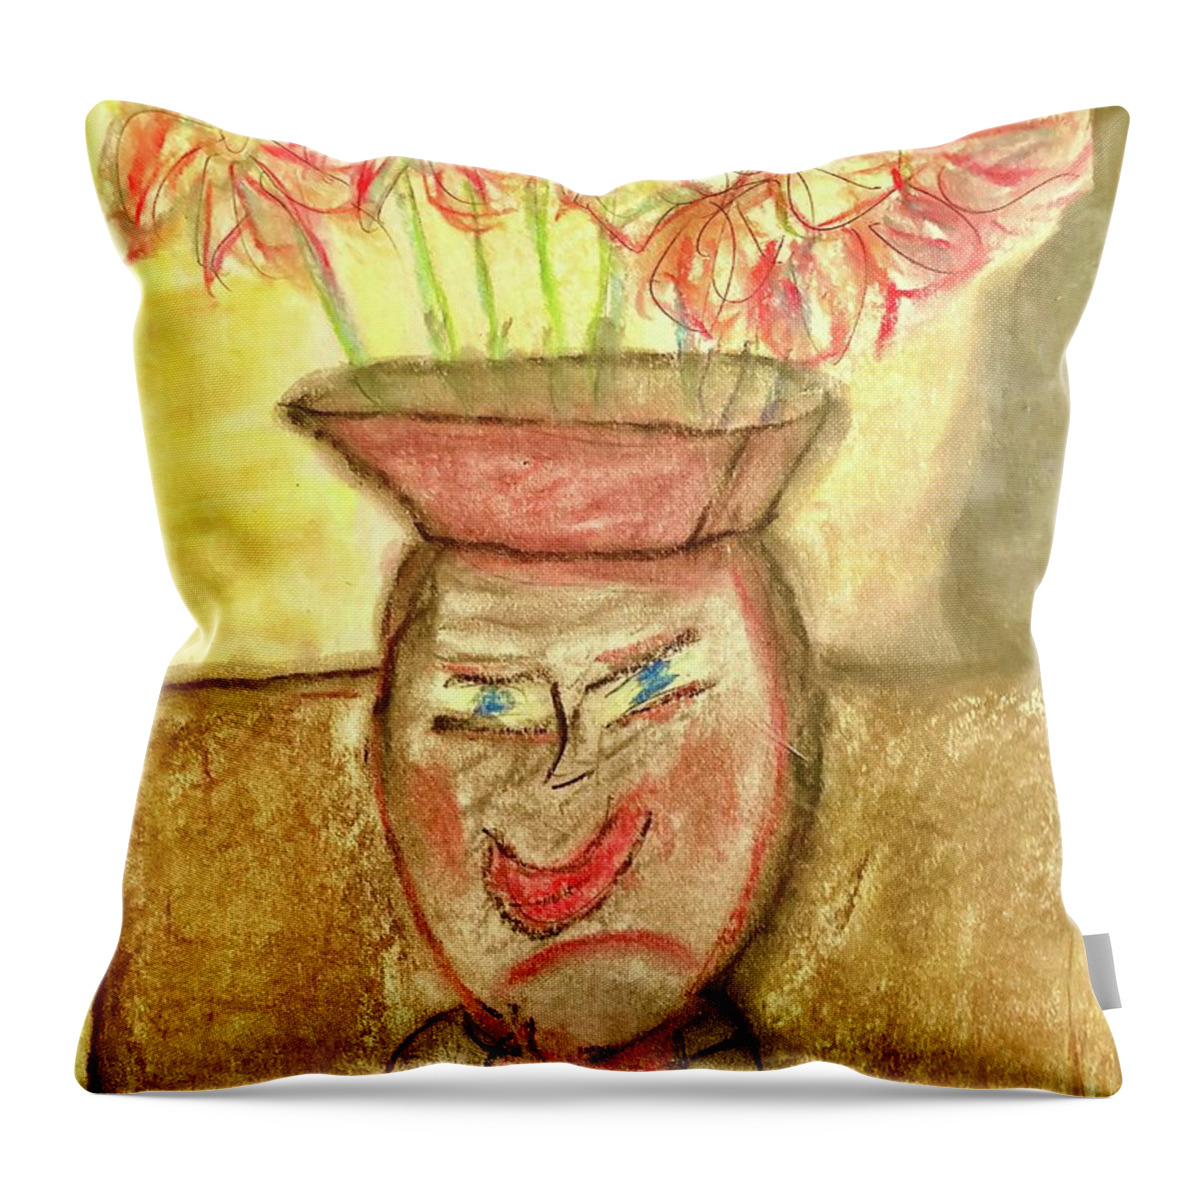 Mr Ming Vase Throw Pillow featuring the pastel Mr Ming Vase by Bencasso Barnesquiat